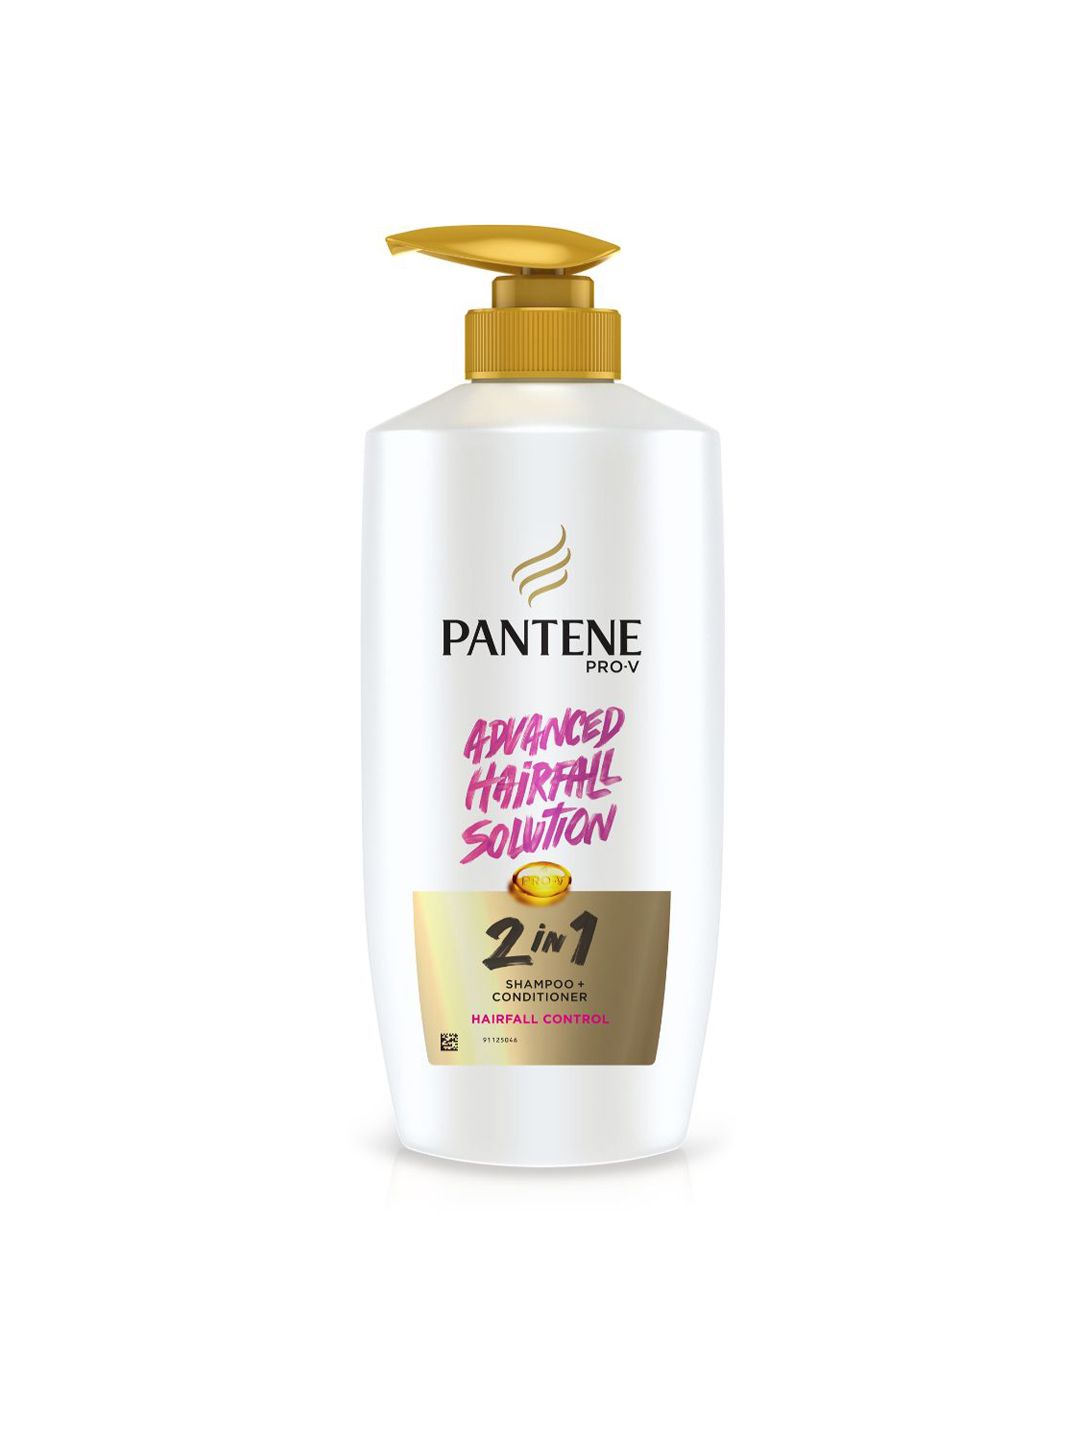 Pantene Women Advanced Hairfall Solution 2 in 1 Shampoo + Conditioner 650 ml Price in India